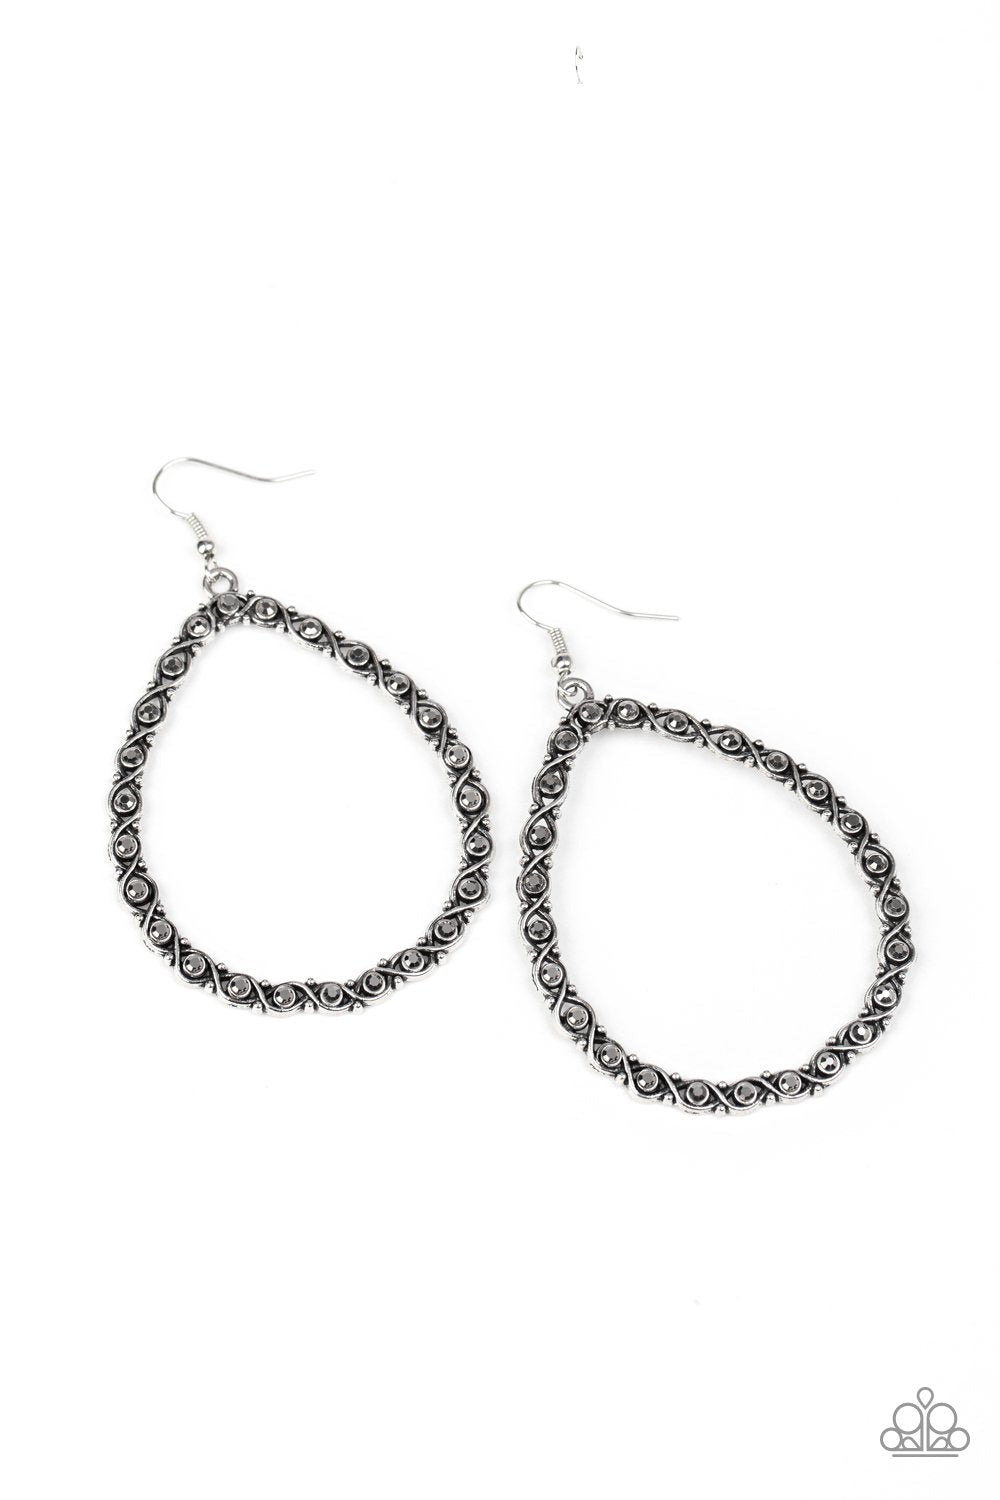 Galaxy Gardens Silver Teardrop Earrings - Paparazzi Accessories Convention Exclusive-CarasShop.com - $5 Jewelry by Cara Jewels